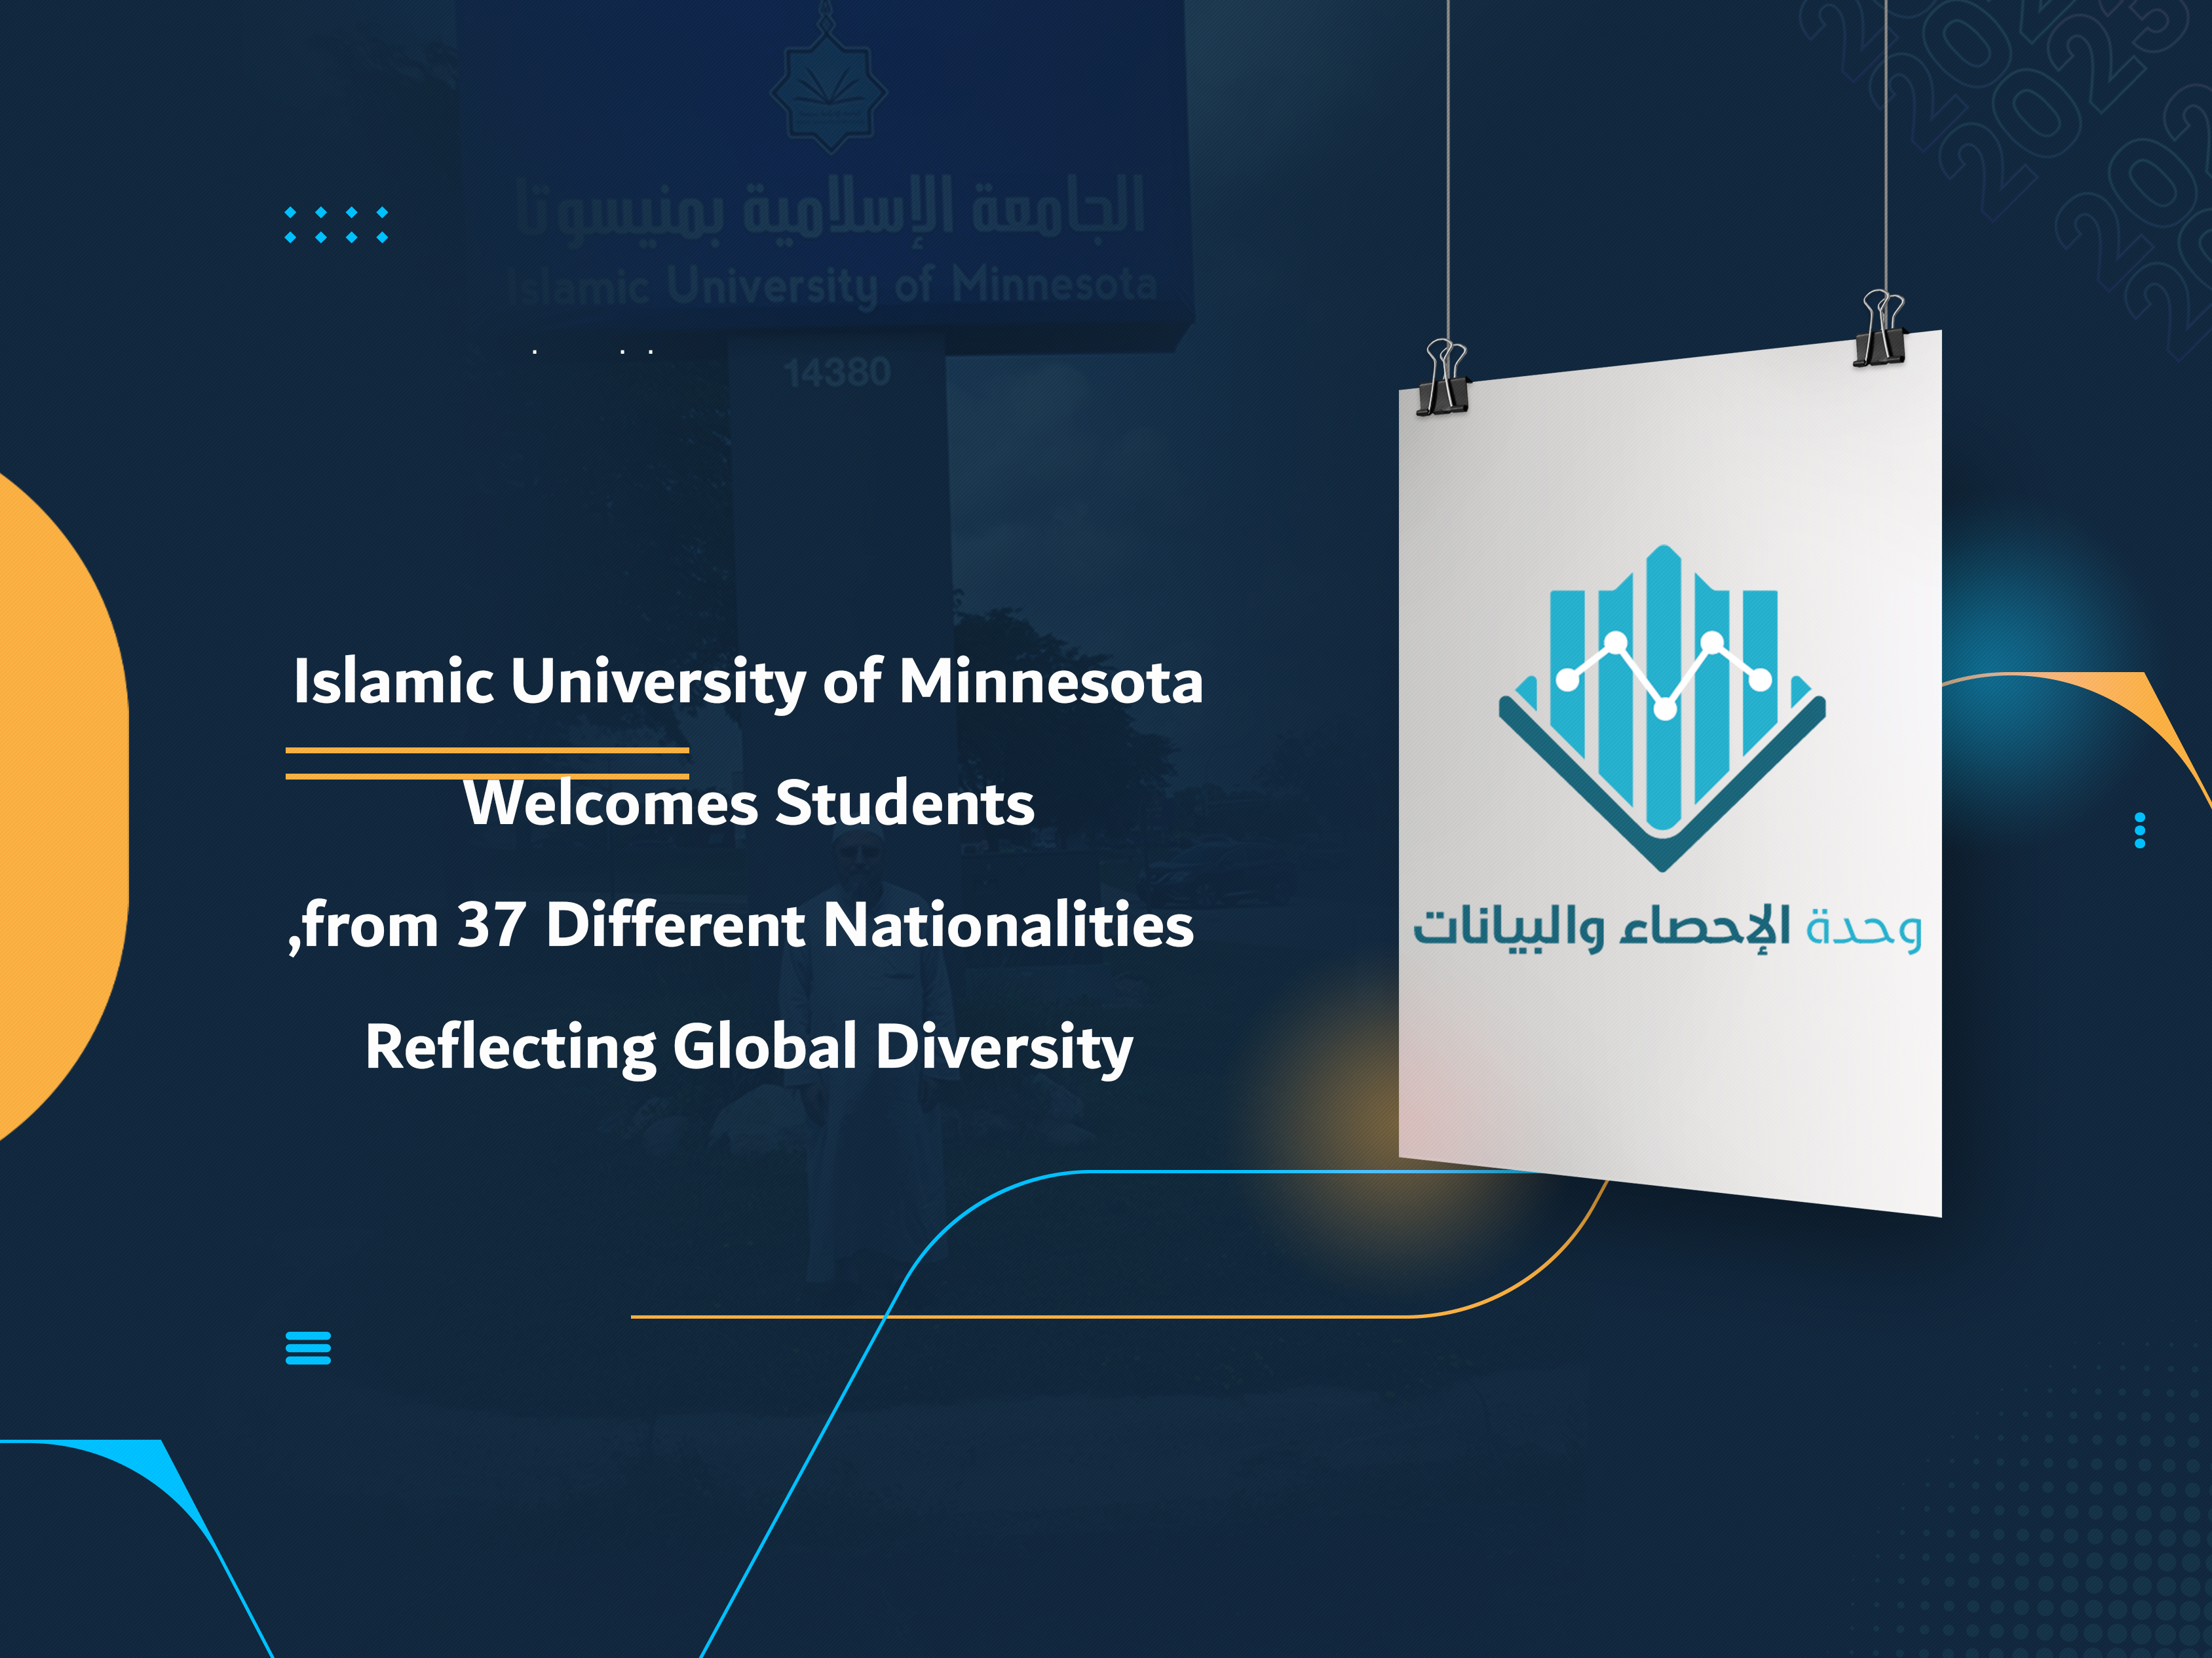 Islamic University of Minnesota Welcomes Students from 37 Different Nationalities, Reflecting Global Diversity